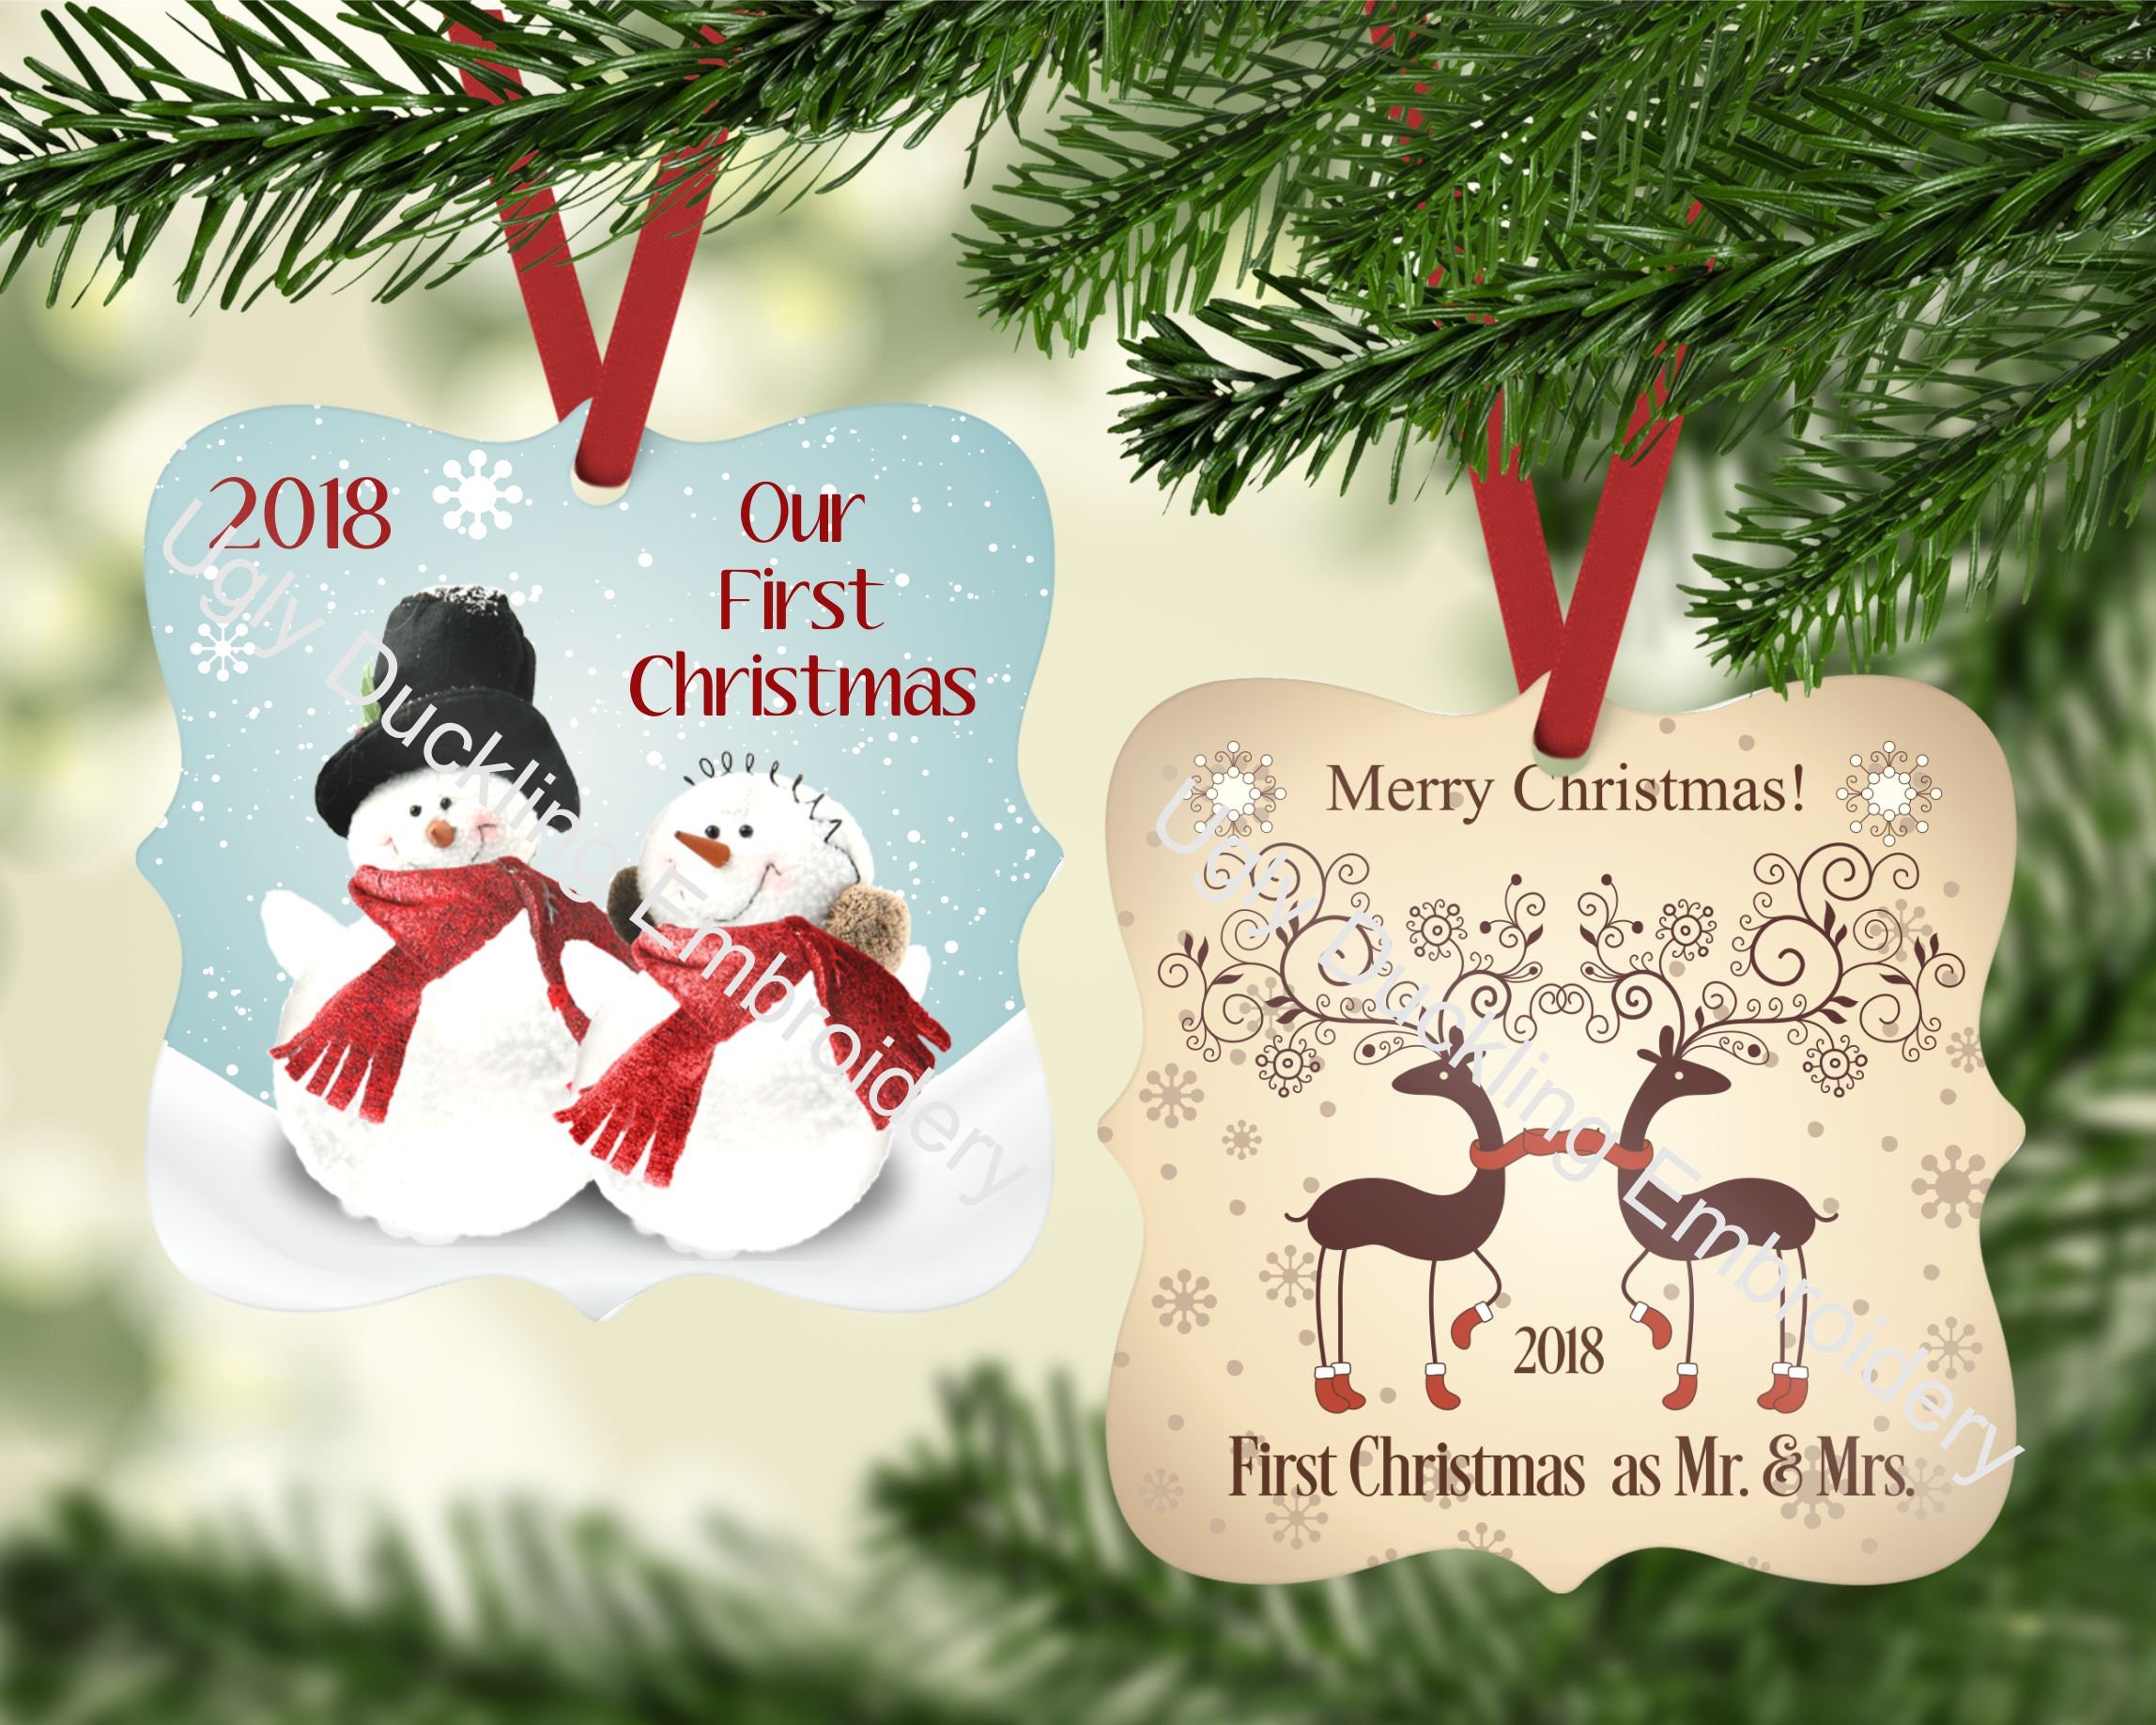 Download First Christmas as Mr & Mrs Sublimation Designs | Etsy